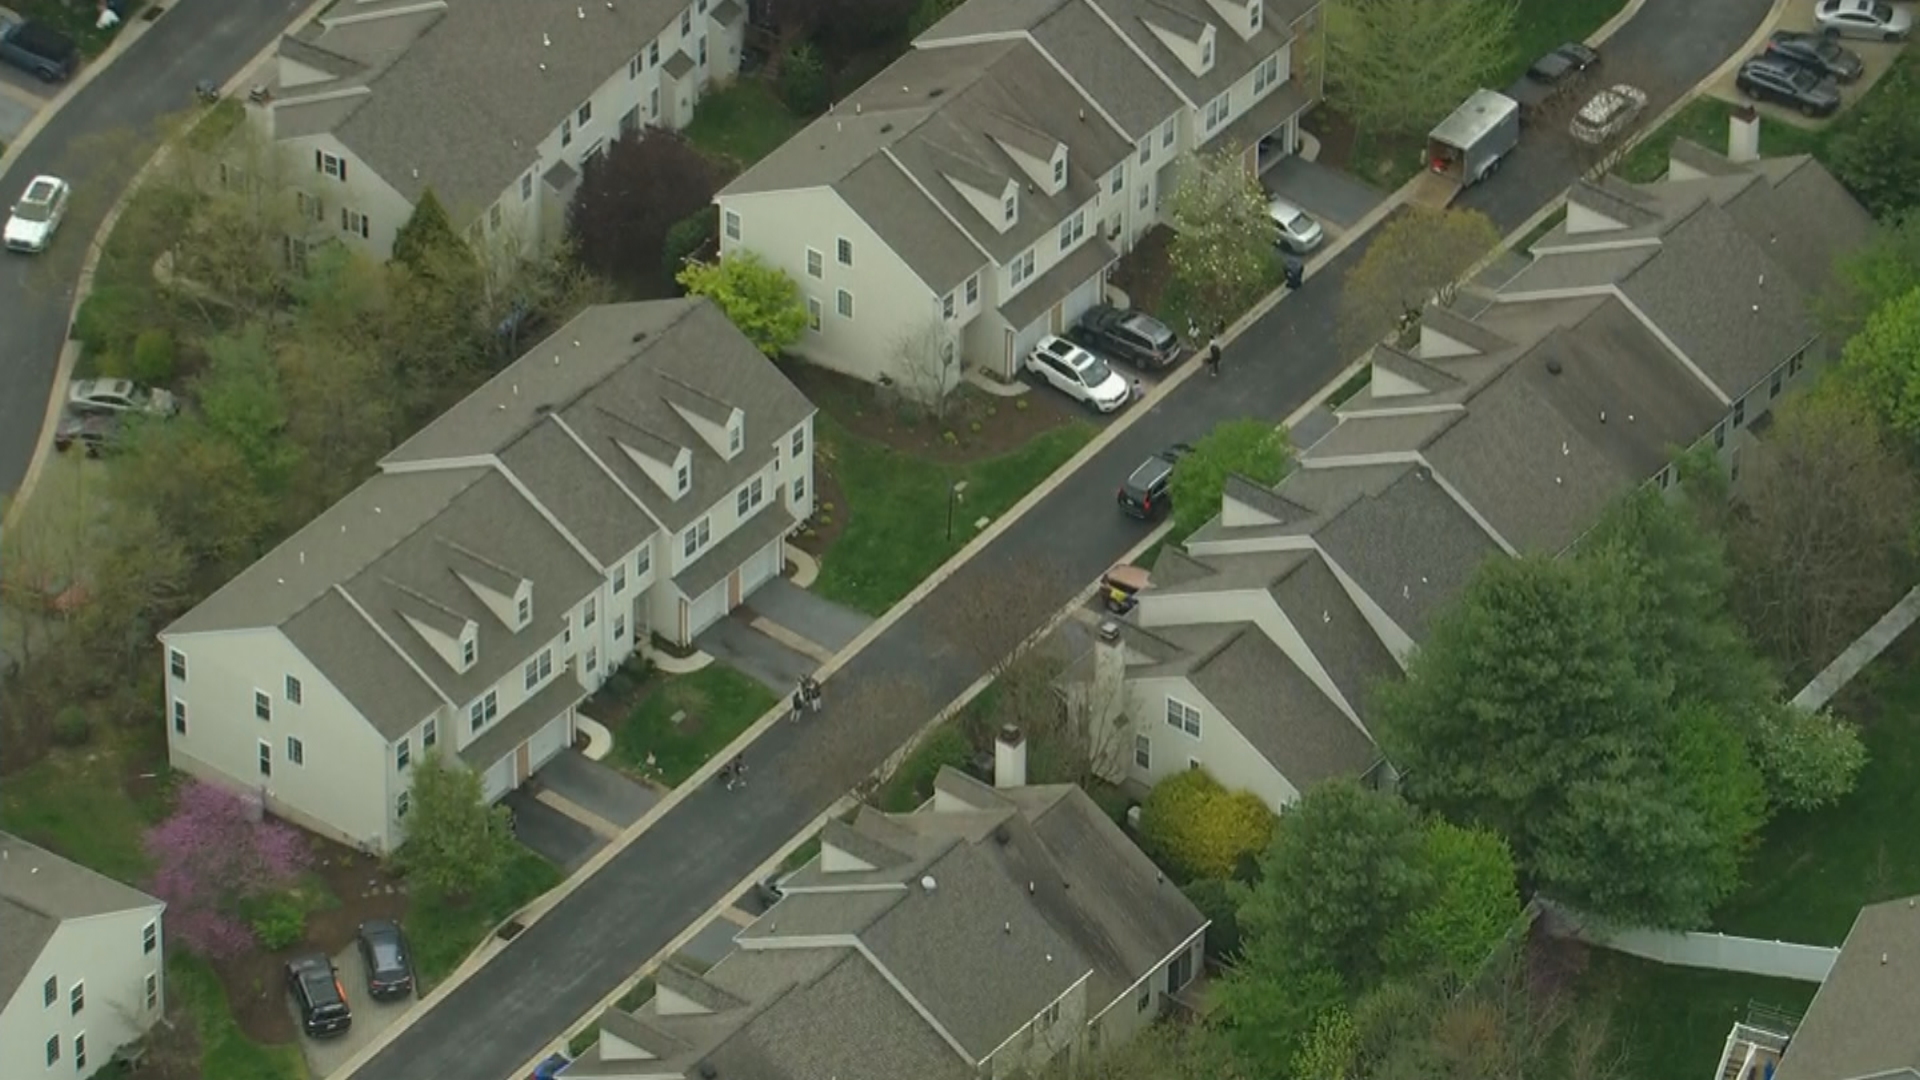 12-year-old parent found dead in apparent double-suicide in Chester County – CBS Philly